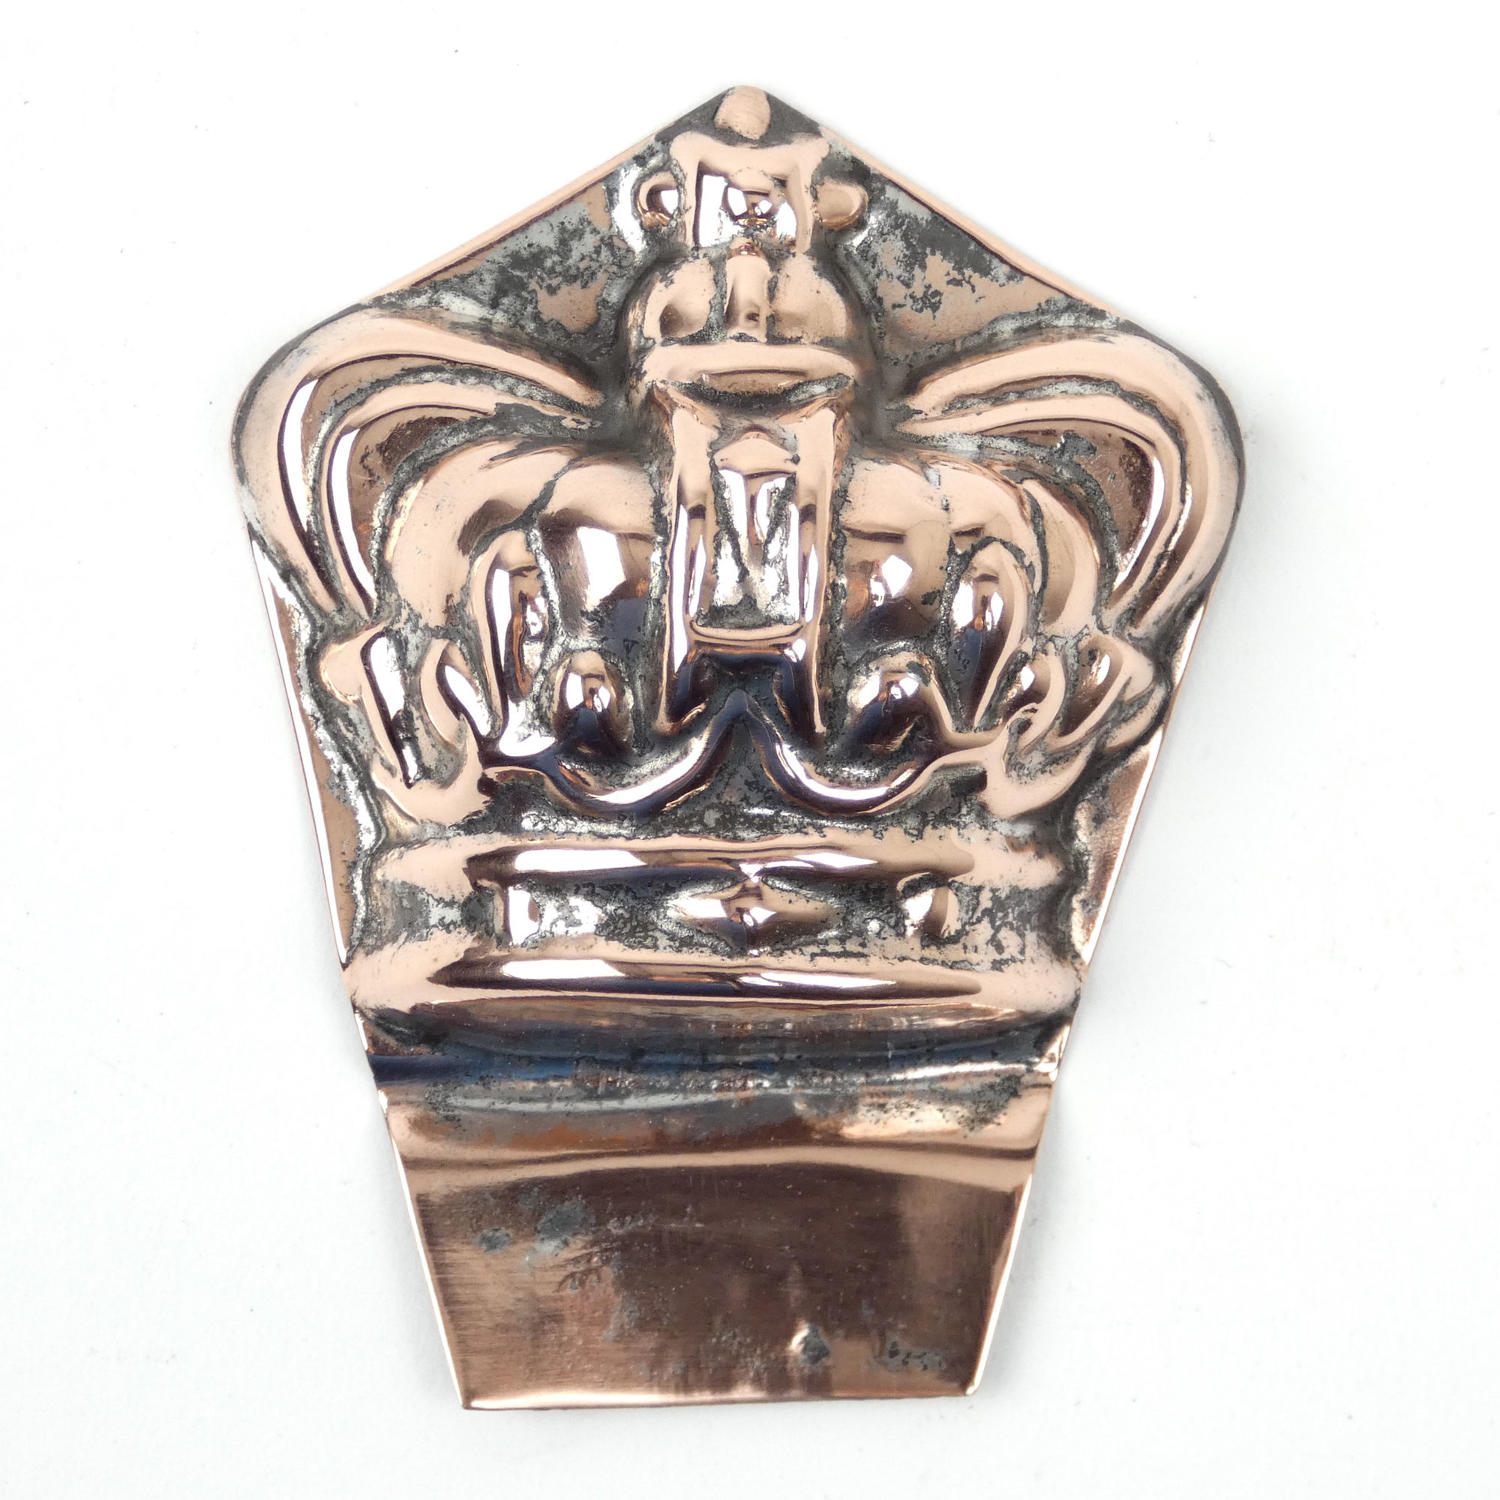 Small crown mould